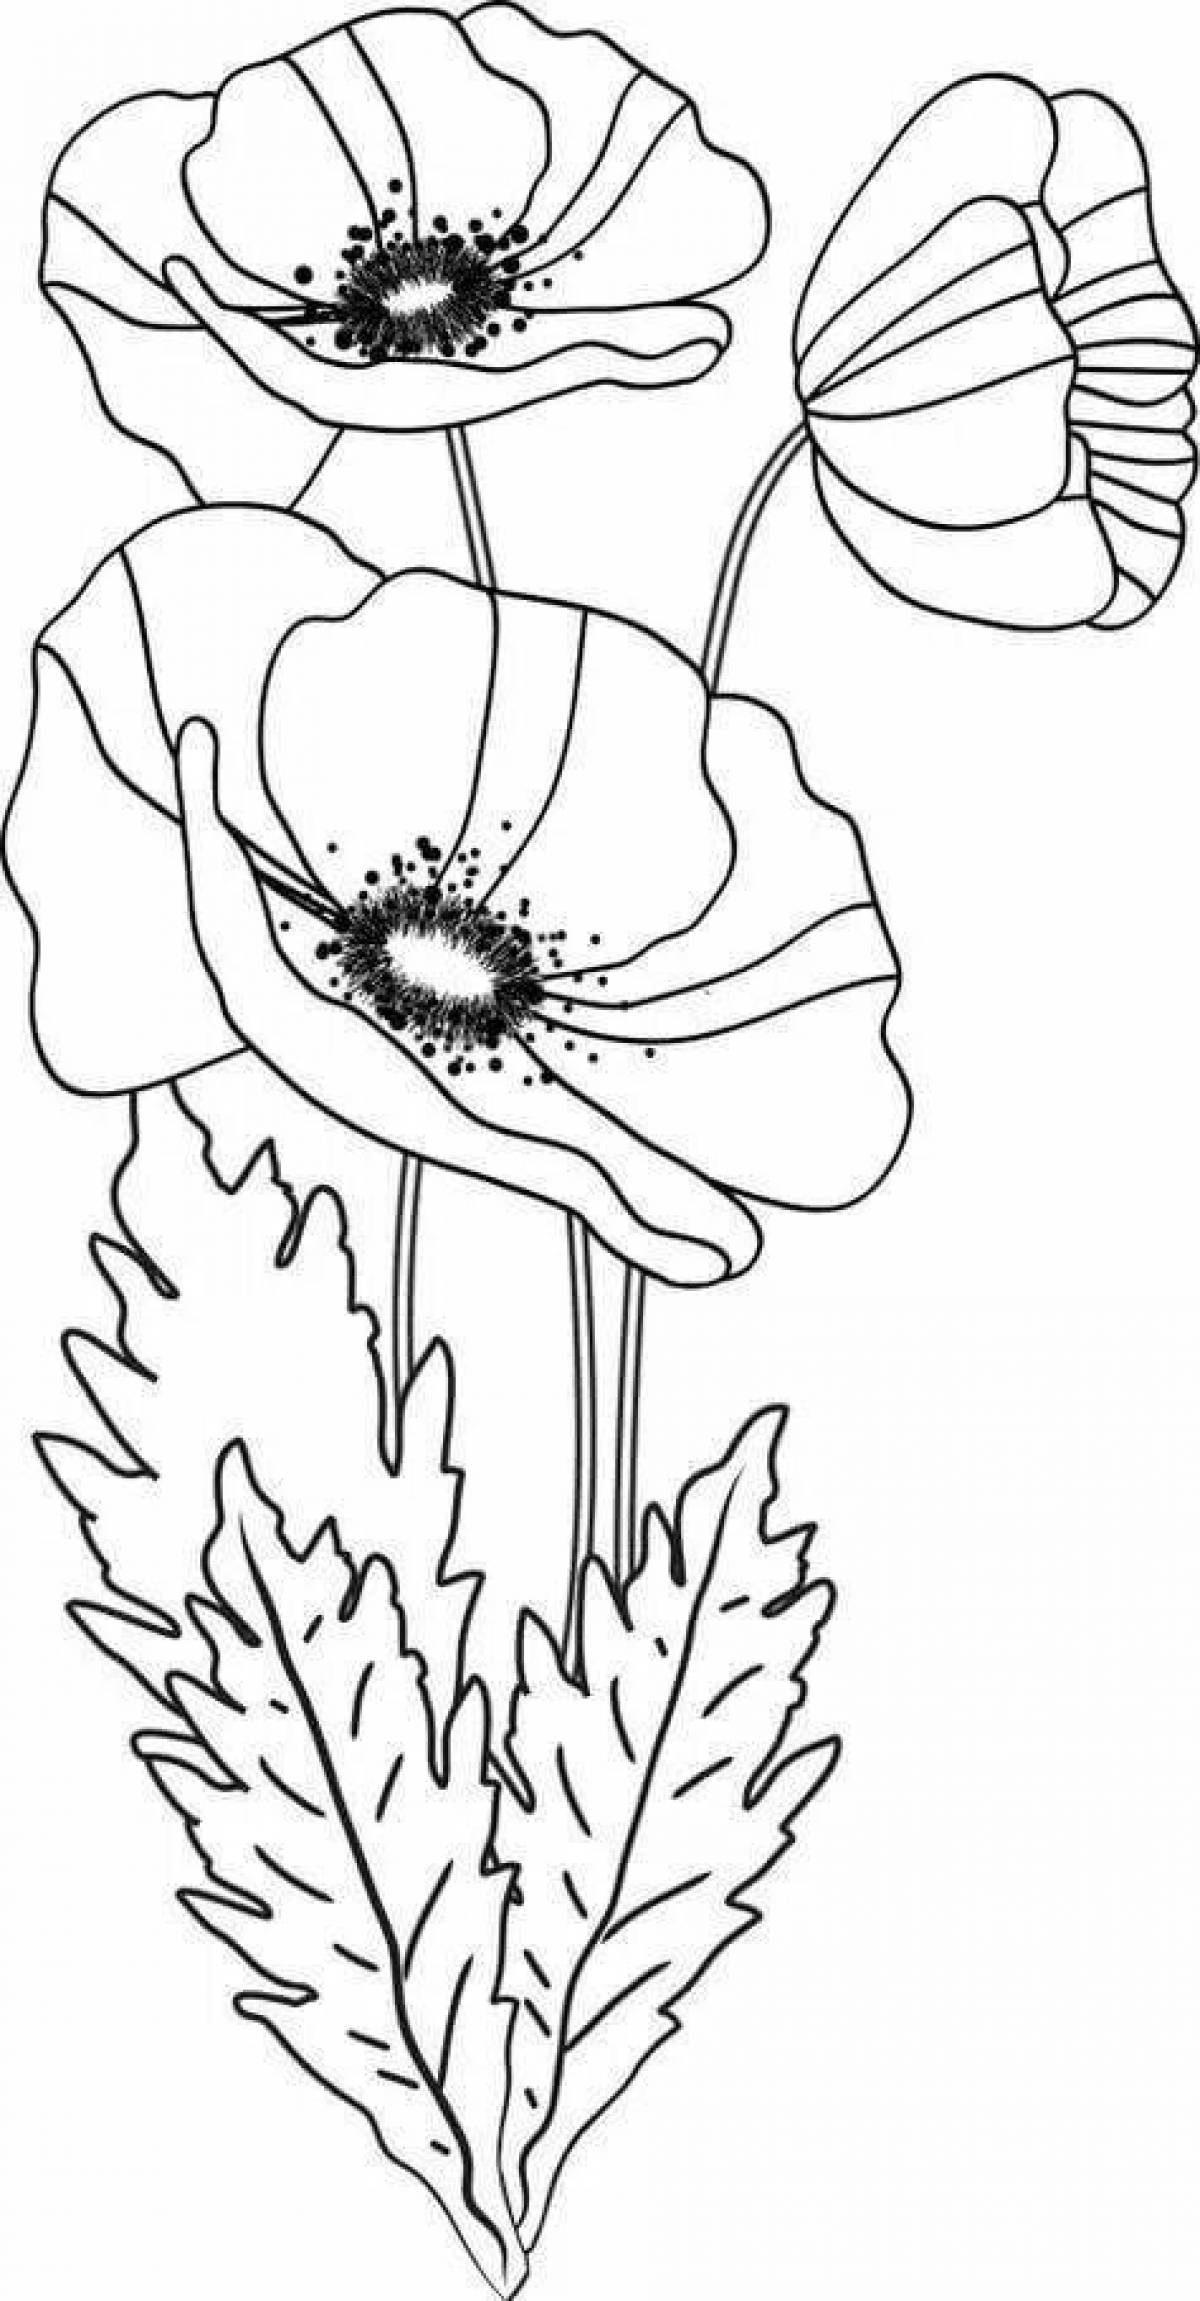 Coloring book shining poppy flower